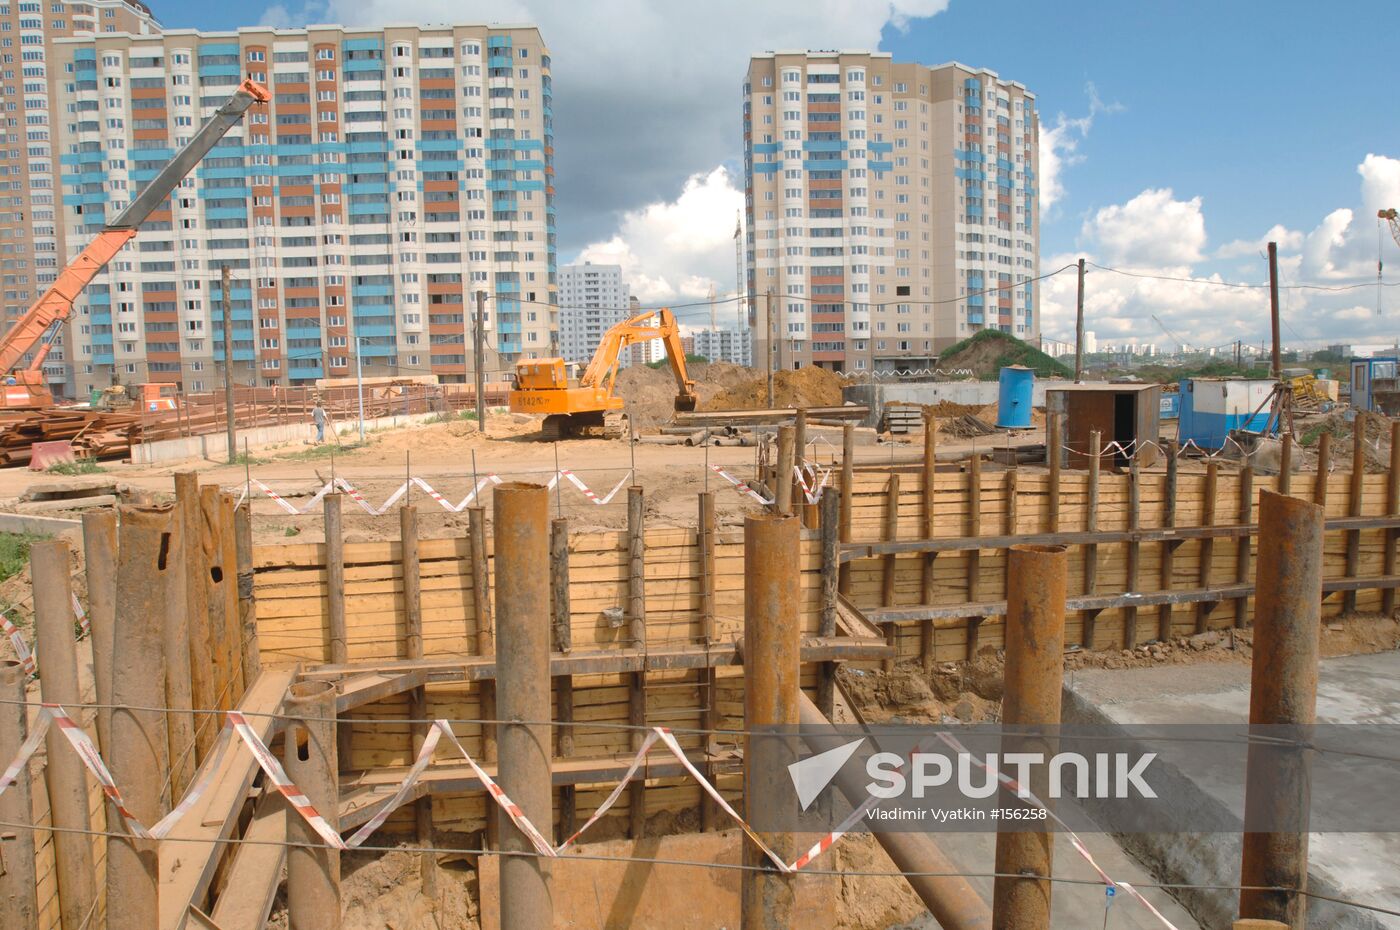 CONSTRUCTION OF A NEW HOUSING ESTATE IN THE MOSCOW REGION 